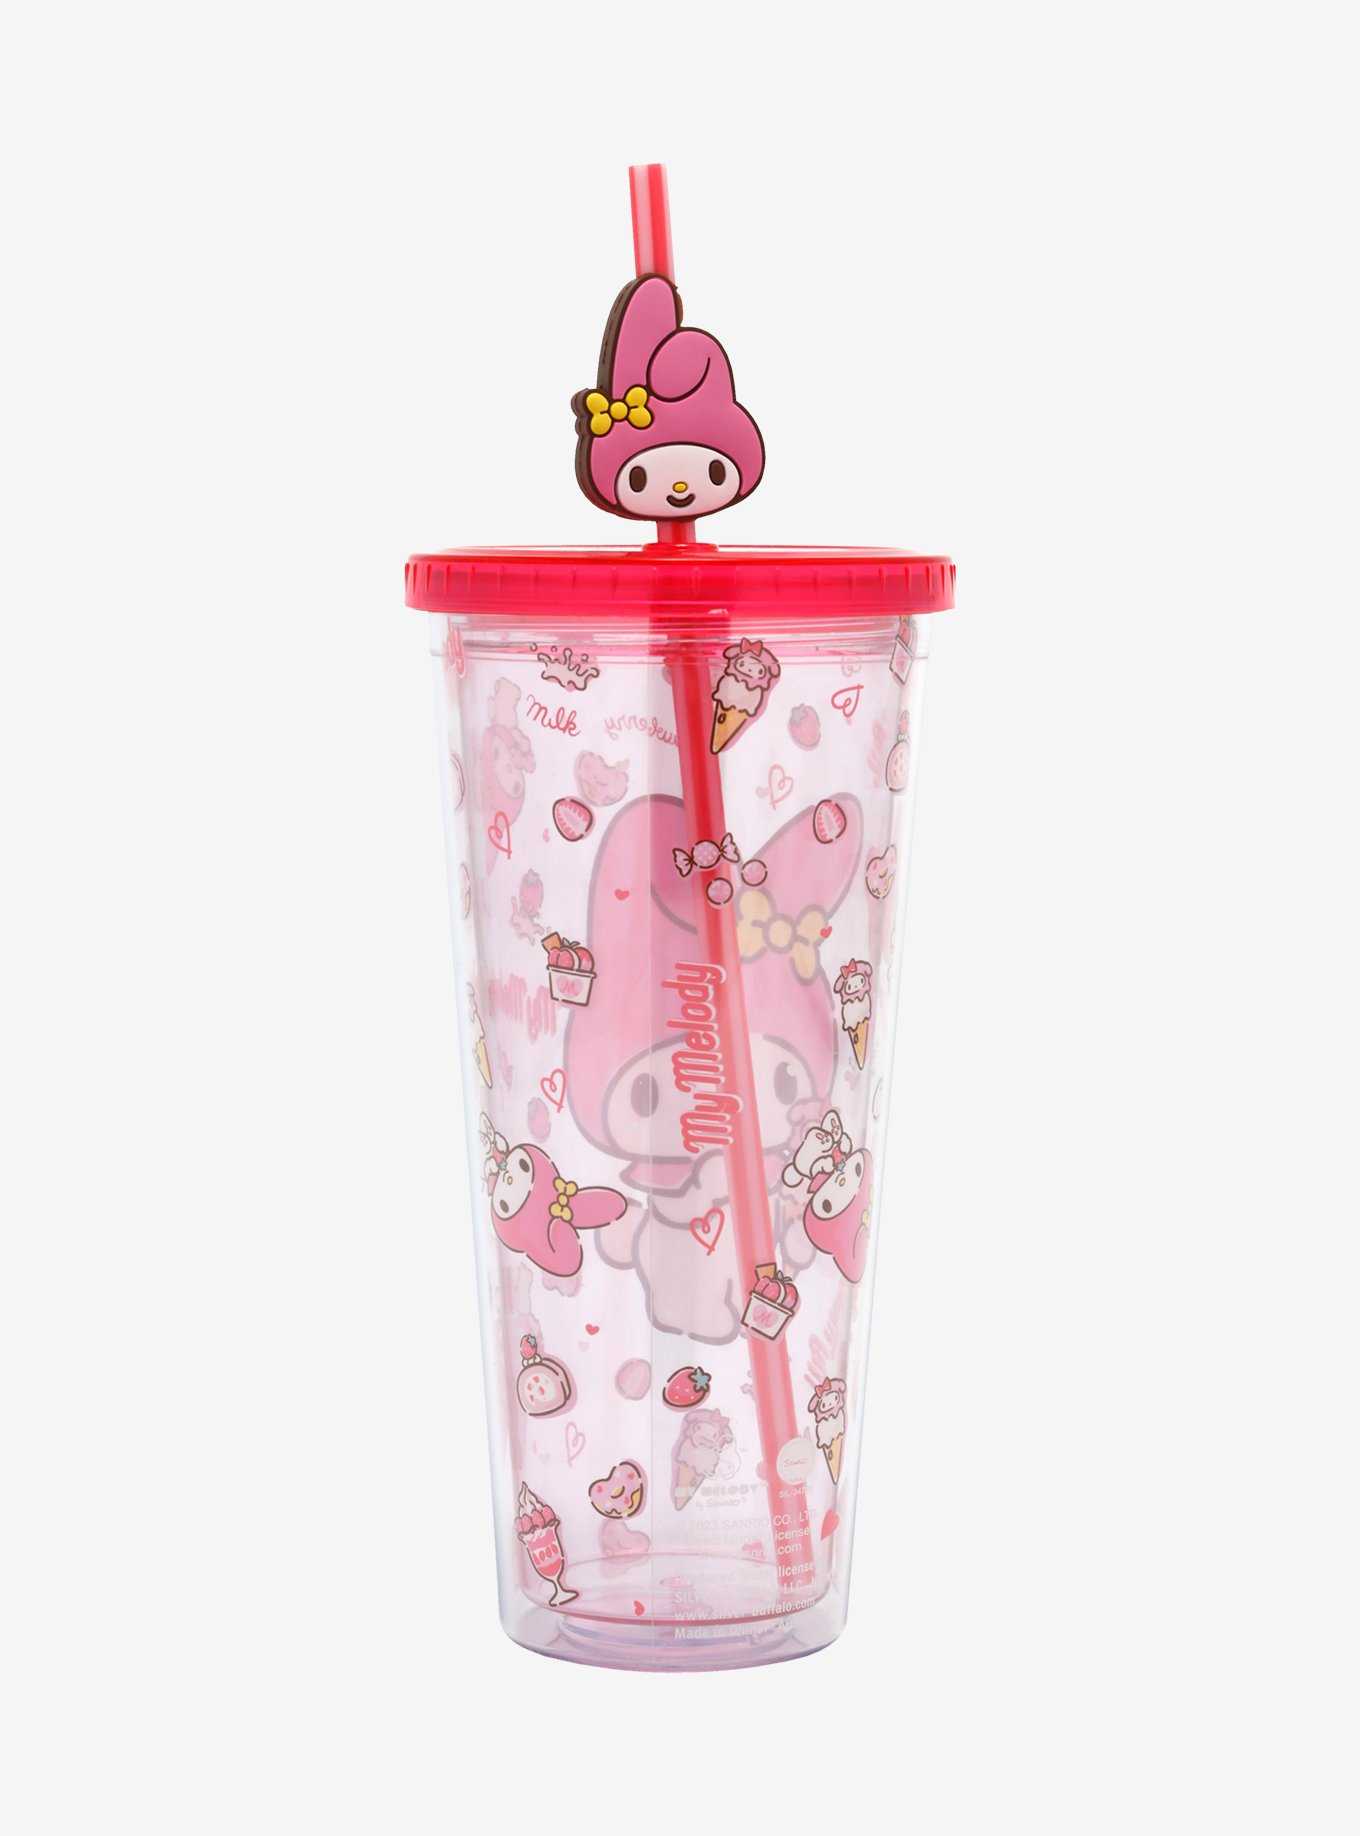 Sanrio My Melody Strawberry Desserts Allover Print Carnival Cup with Straw Charm, , hi-res